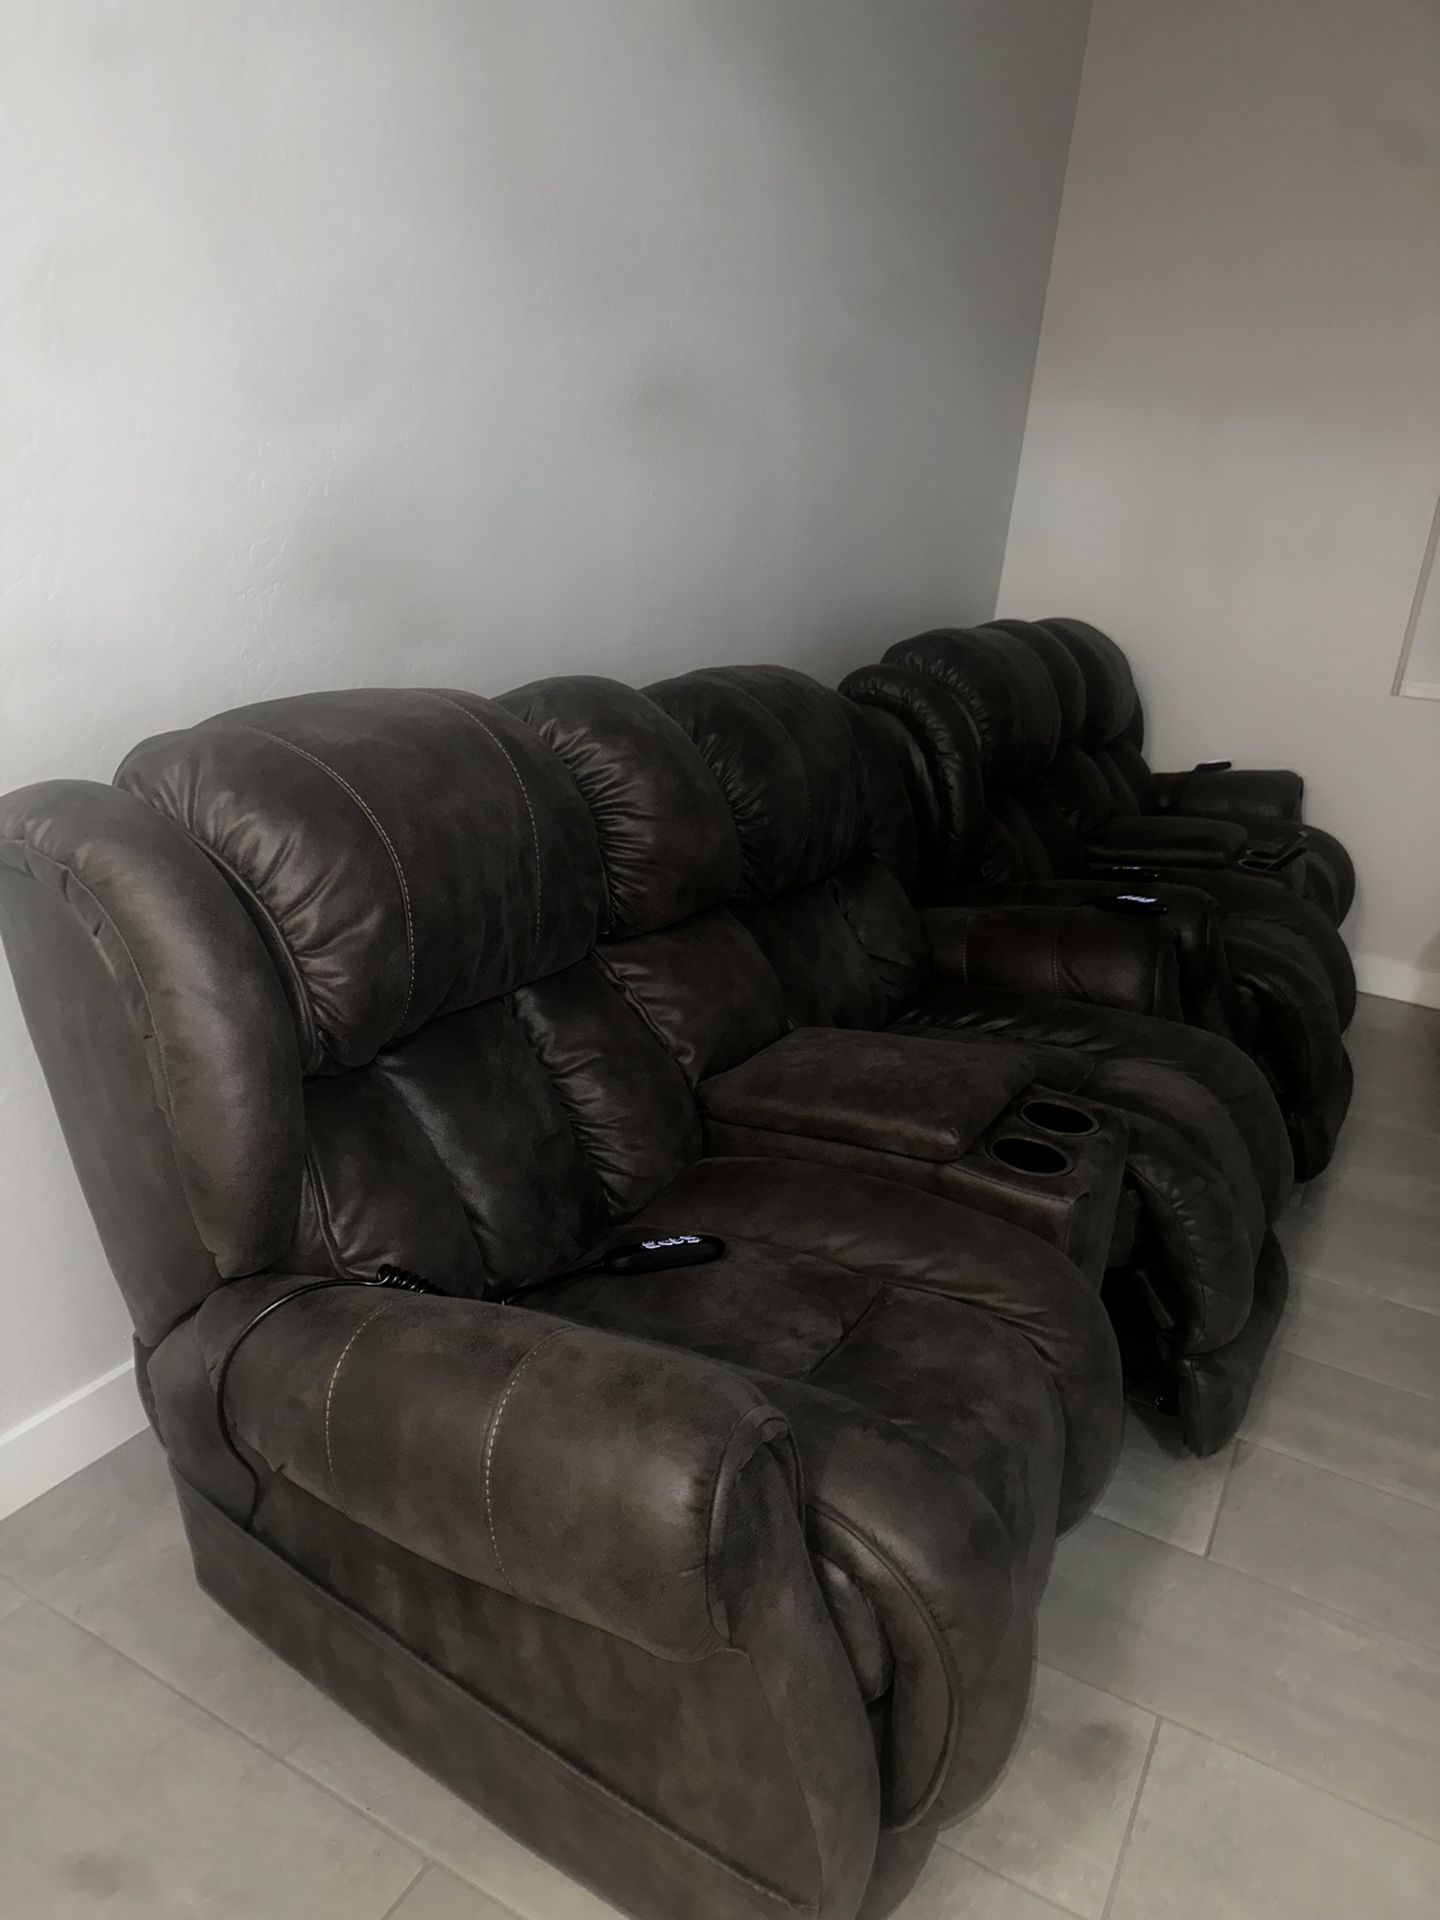 4,000$ Leather Recliner Couches Chairs Movie Room